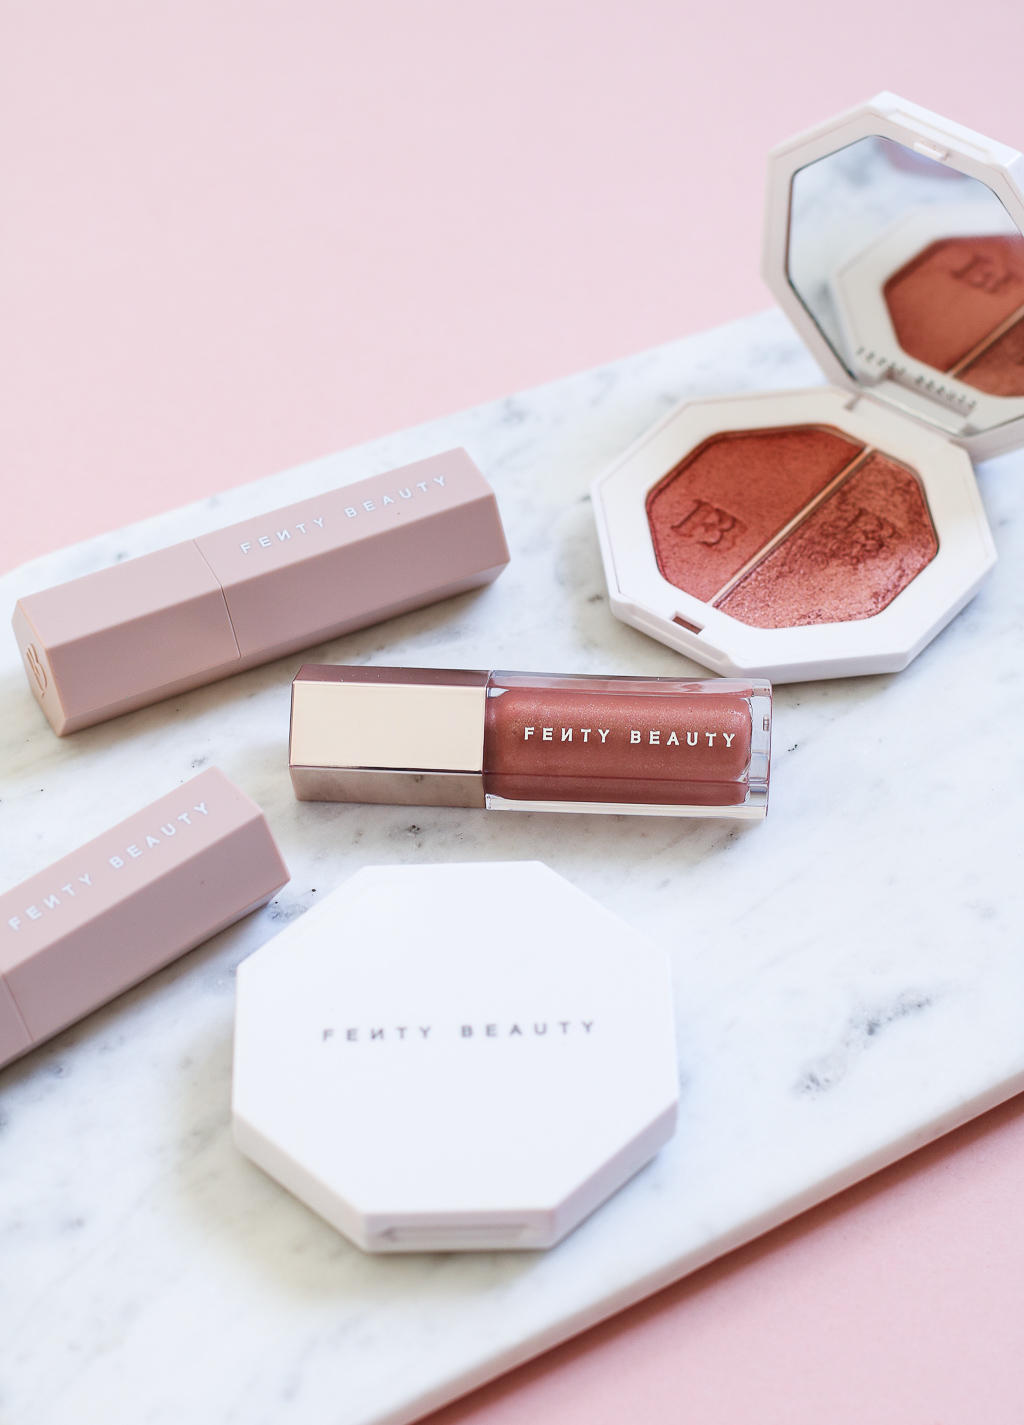 Is Fenty Beauty worth the hype? Read this before you invest!